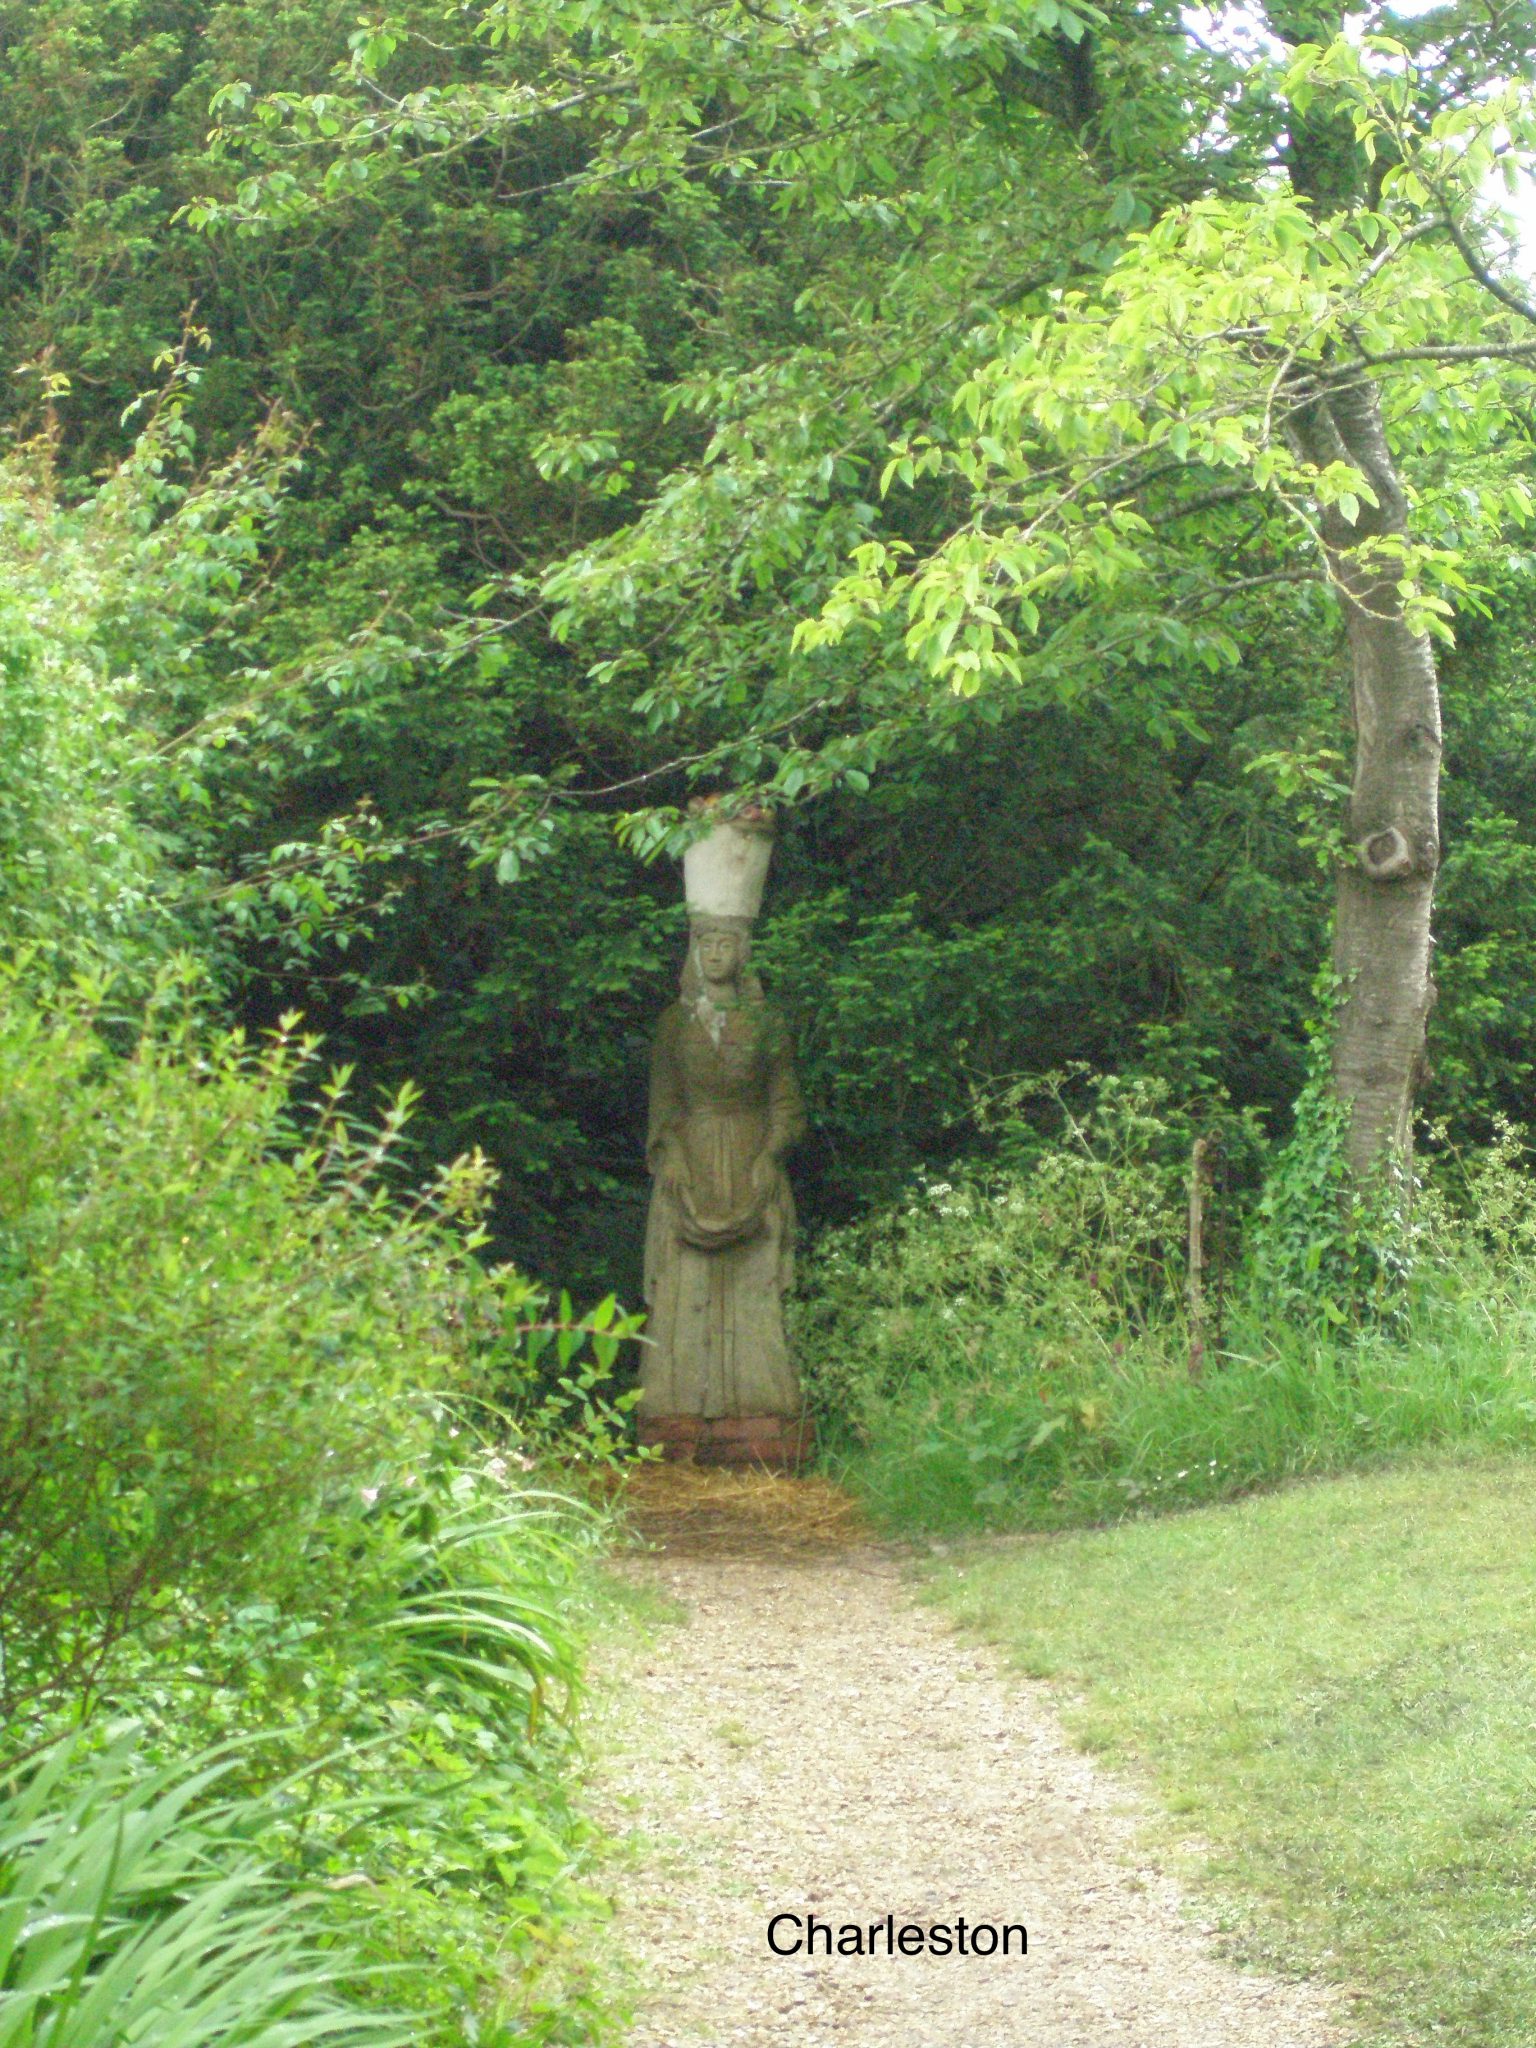 And Quentin Bell's statue of POMONA, also made in 1954, guards a path to the Orchard. Pomona is a Roman goddess, and the keeper of fruit trees.